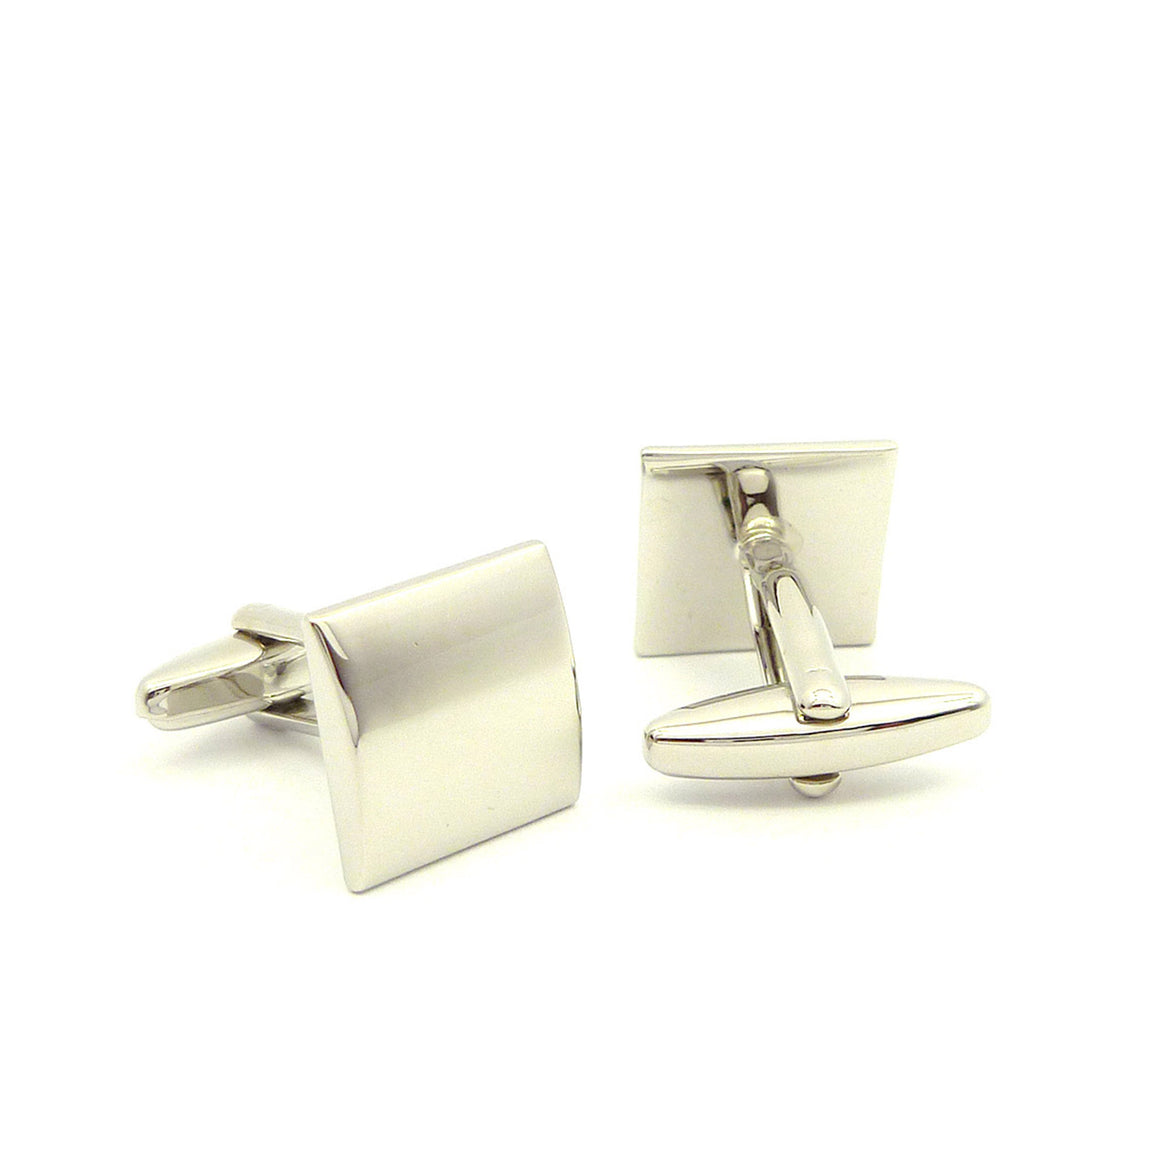 Wild Links - Silver Engravable Brushed Square Cufflinks